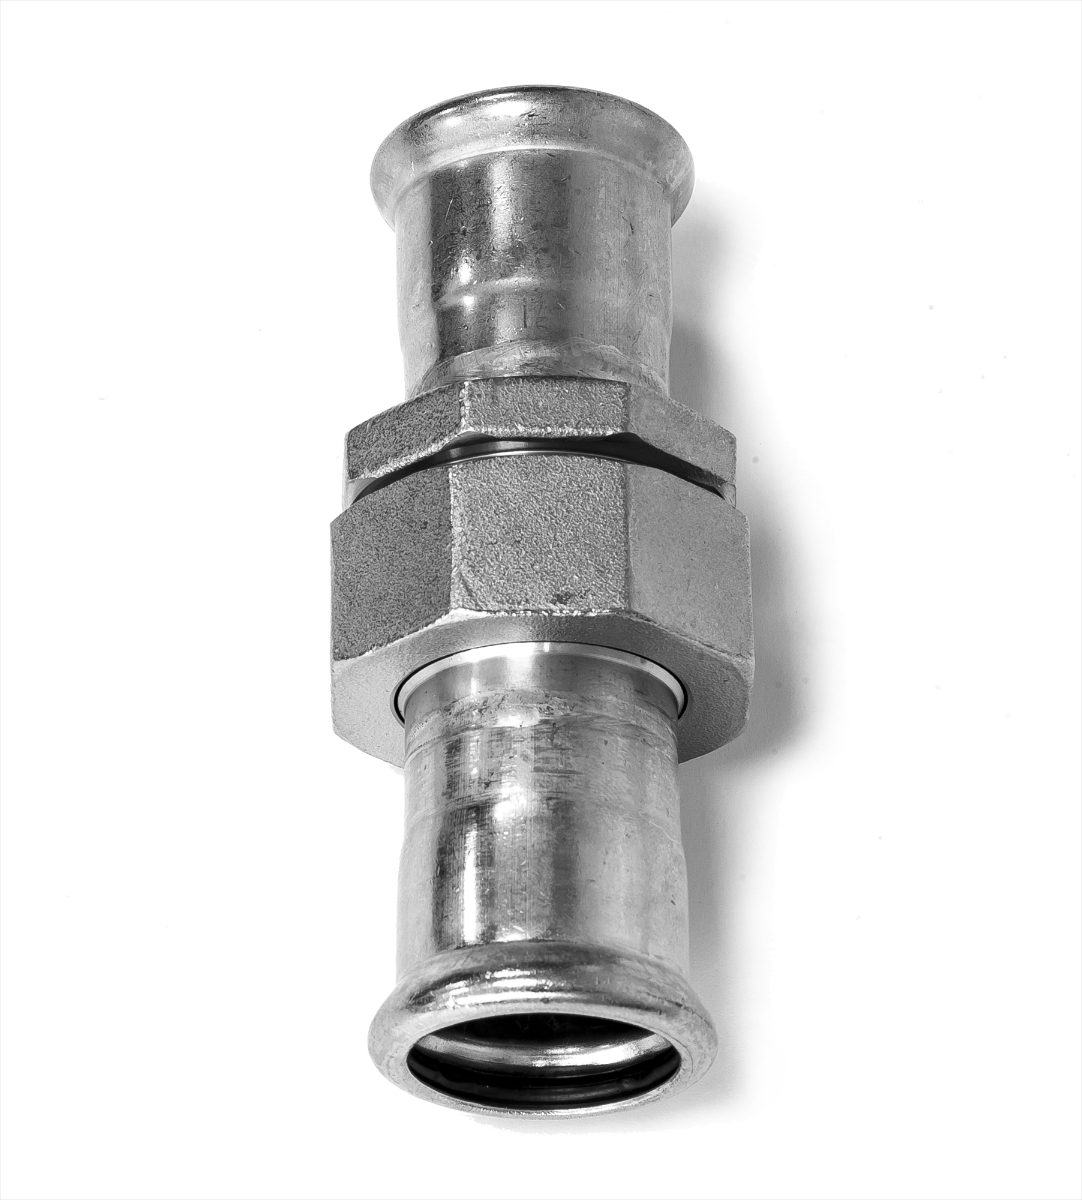 Press Fittings Union coupling - NERO Pipeline Connections Ltd